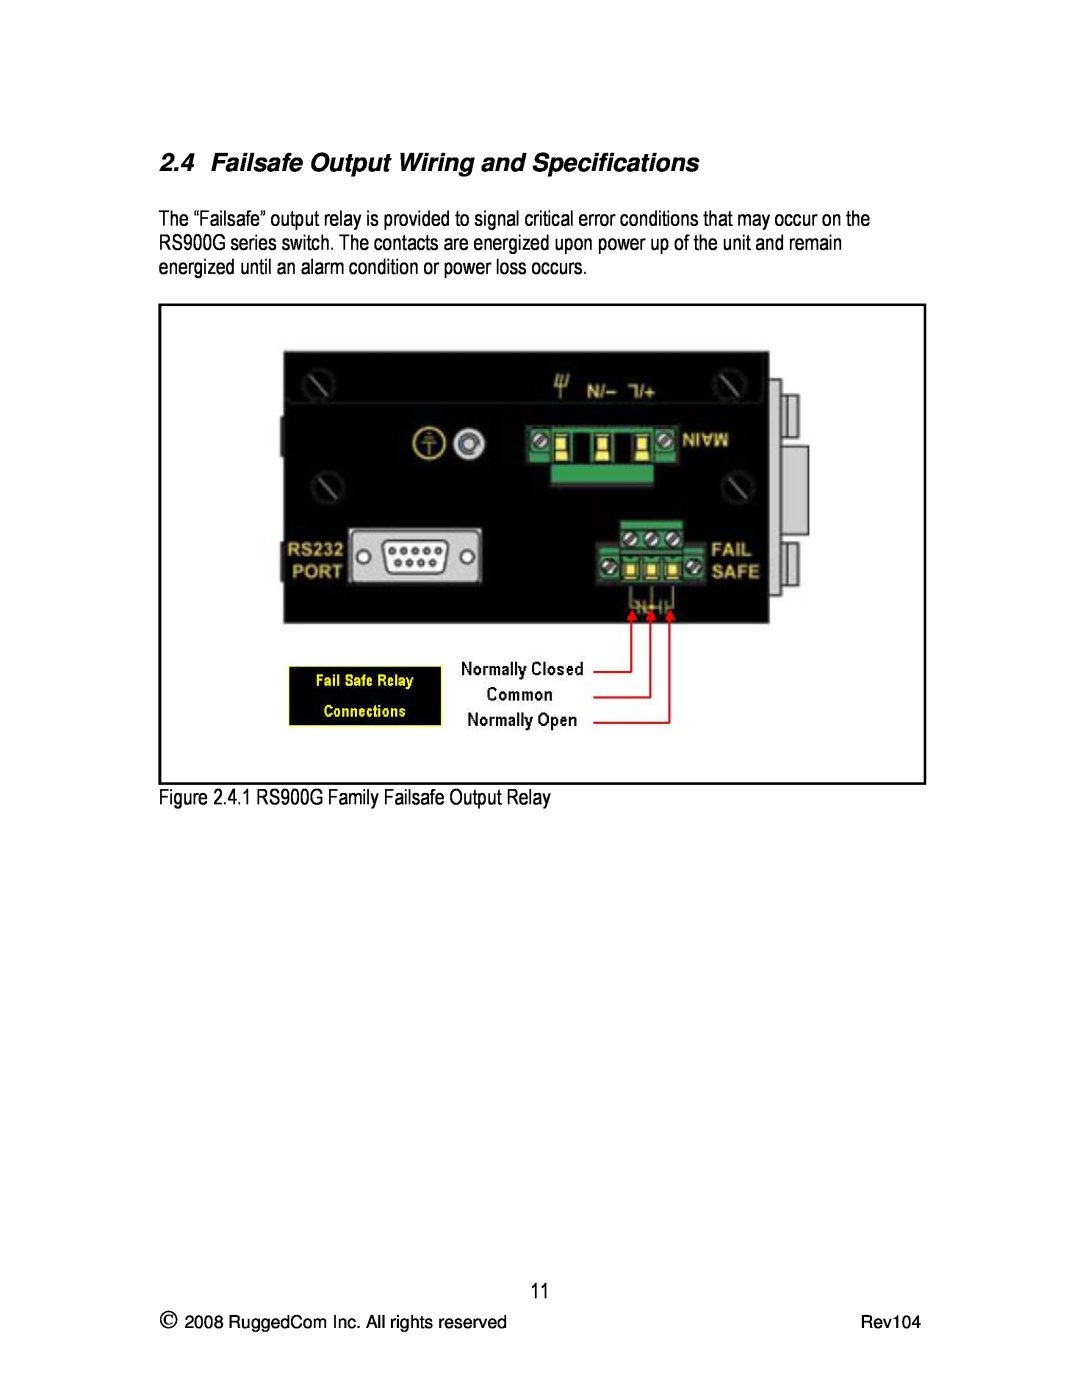 RuggedCom manual Failsafe Output Wiring and Specifications, 4.1 RS900G Family Failsafe Output Relay 